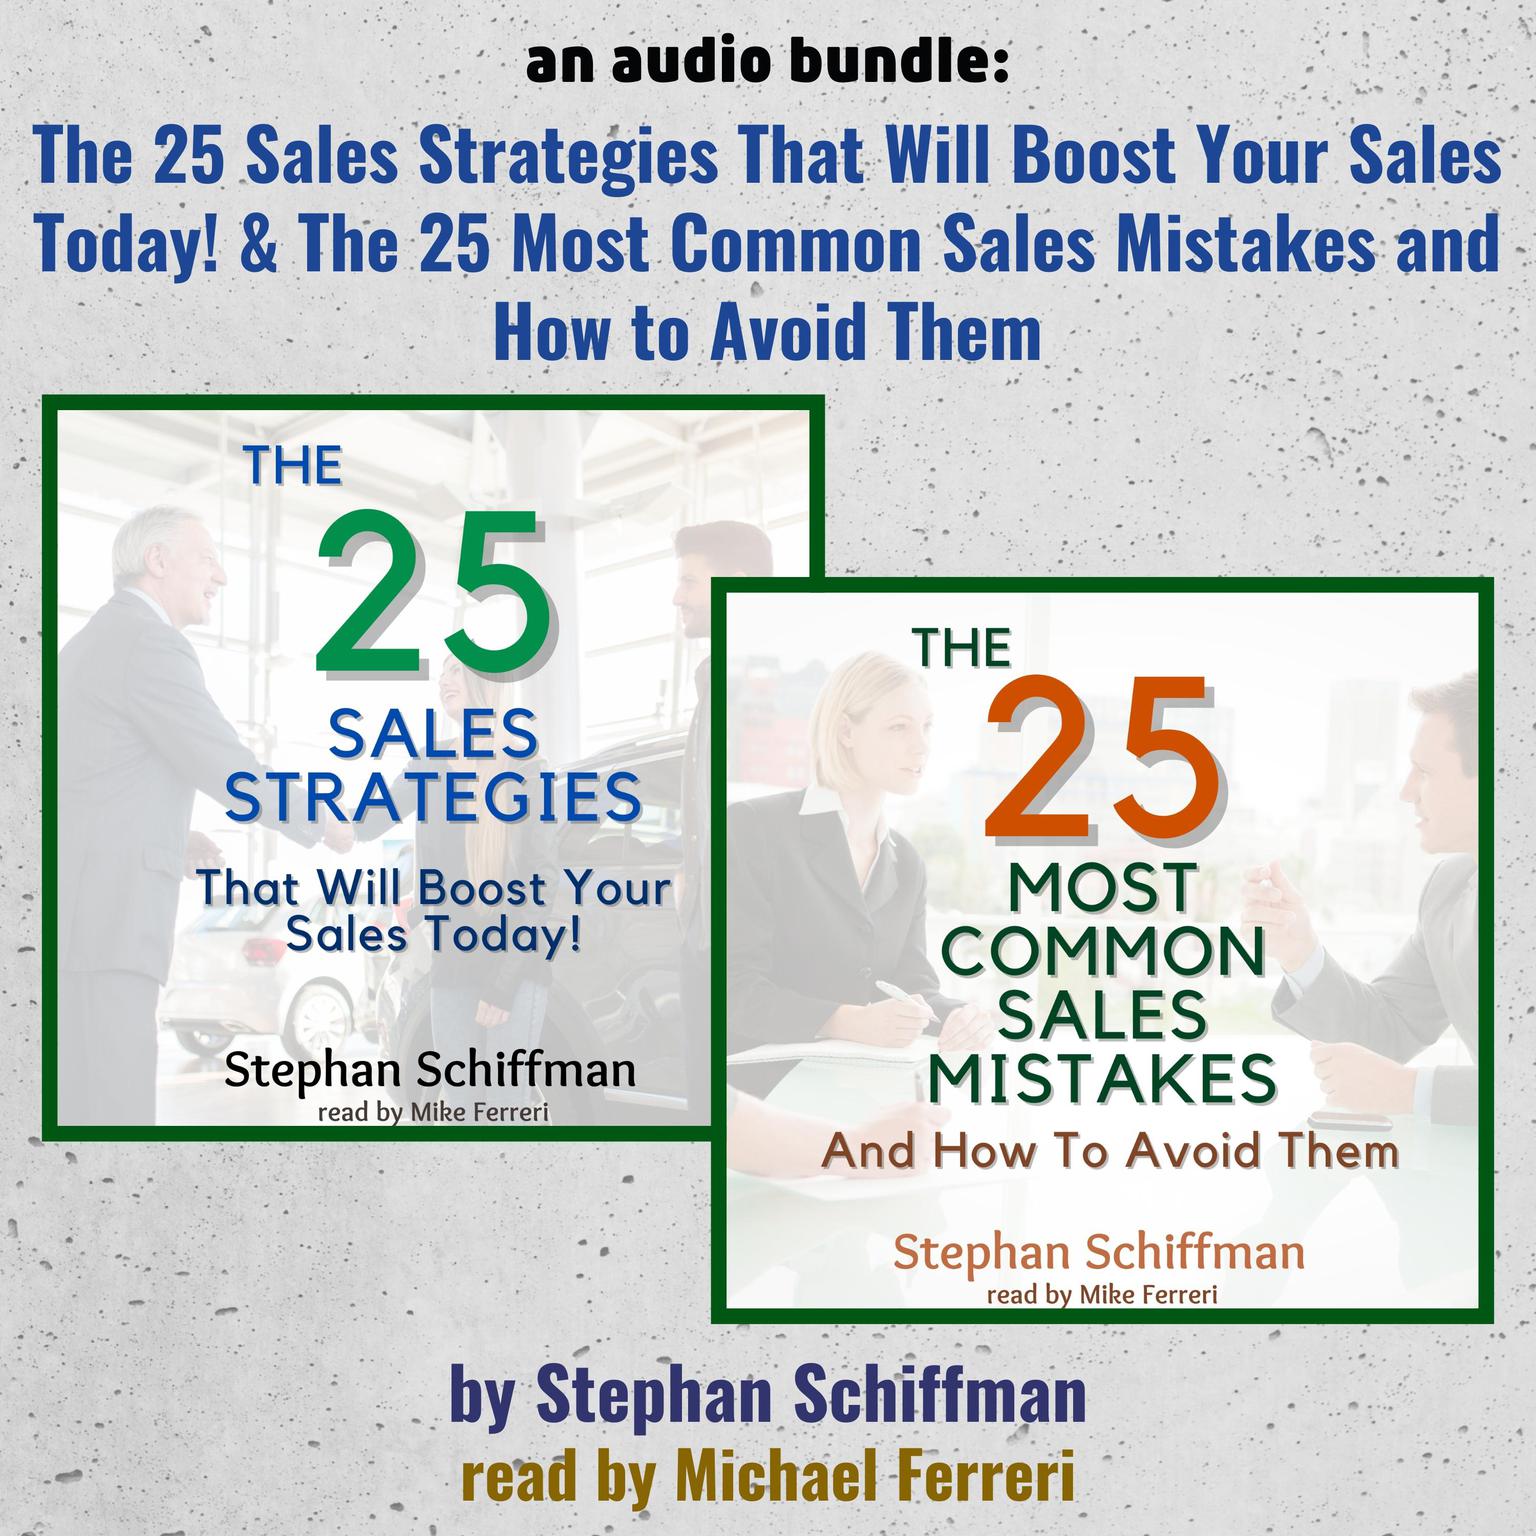 An Audio Bundle: The 25 Sales Strategies That Will Boost Your Sales Today! & The 25 Most Common Sales Mistakes And How To Avoid Them! Audiobook, by Stephan Schiffman